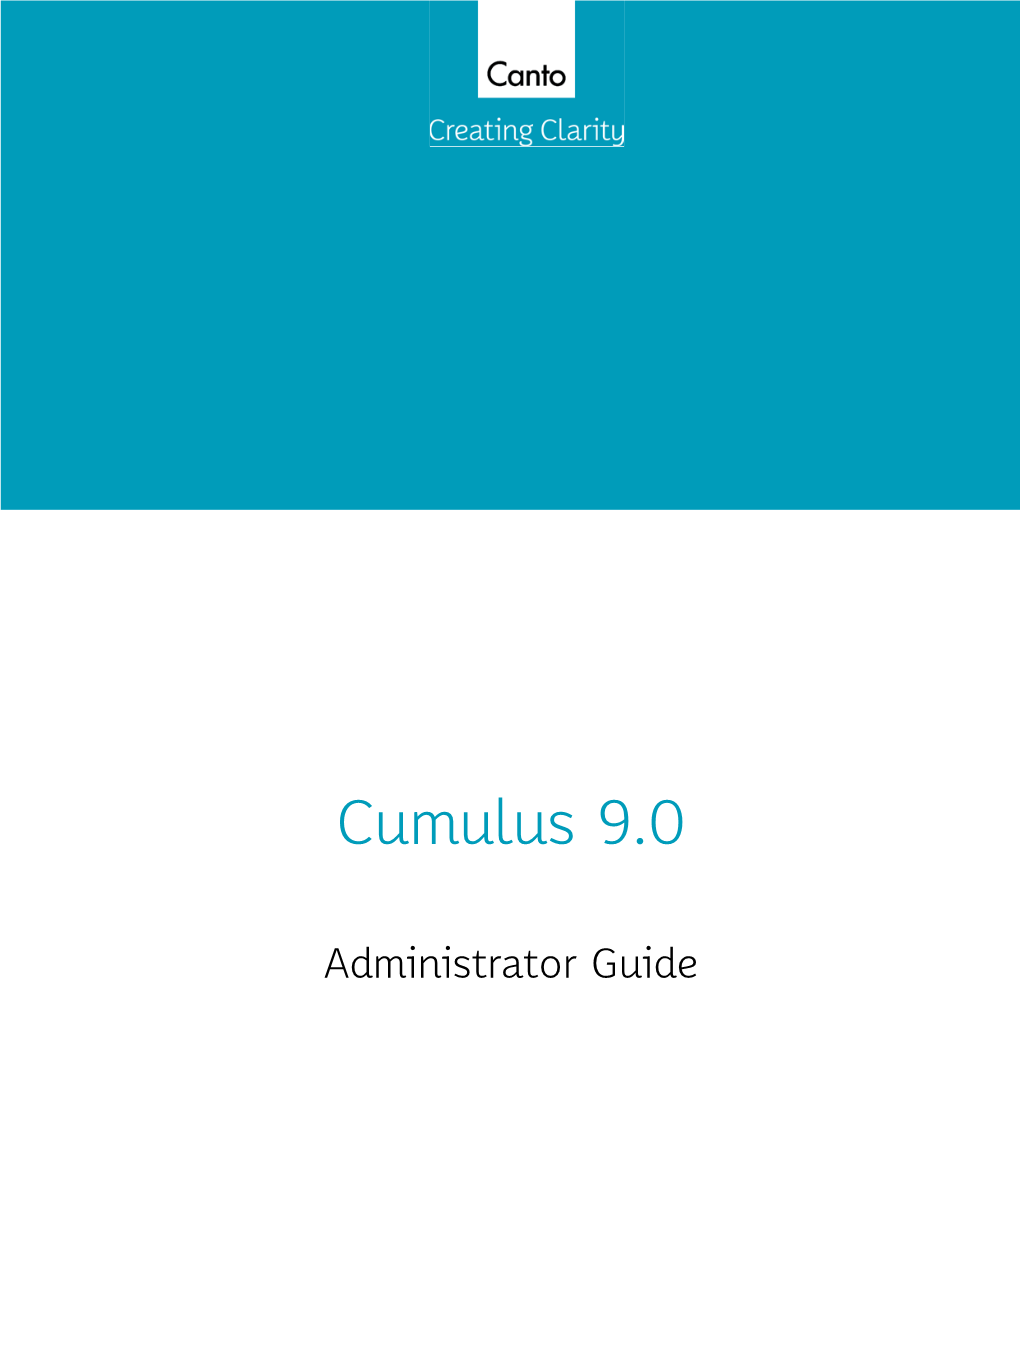 Administrator Guide Copyright 2013, Canto Gmbh